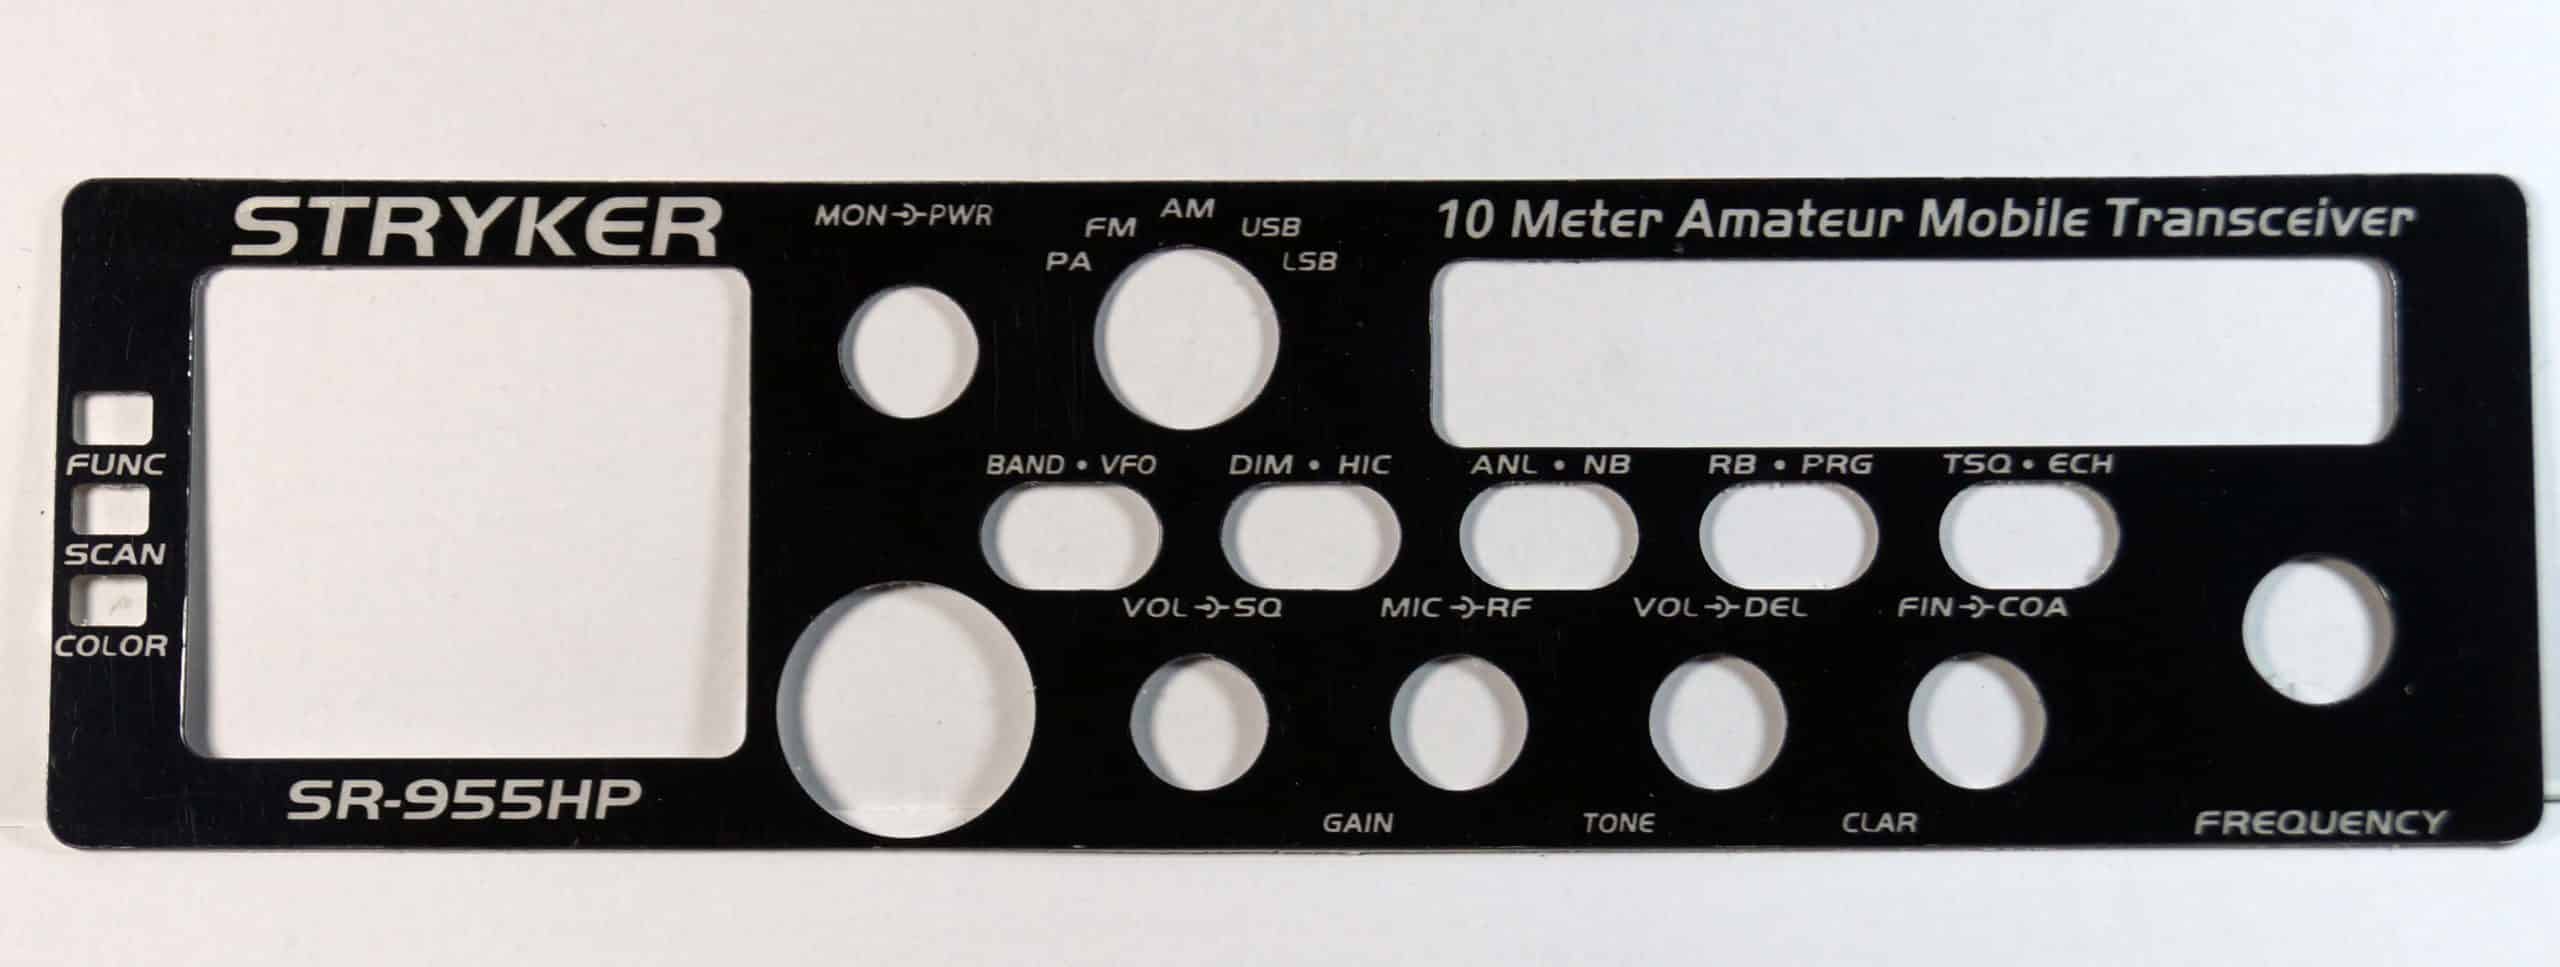 Replacement Black Face Plate for SR-955HPC 10 Meter Radios